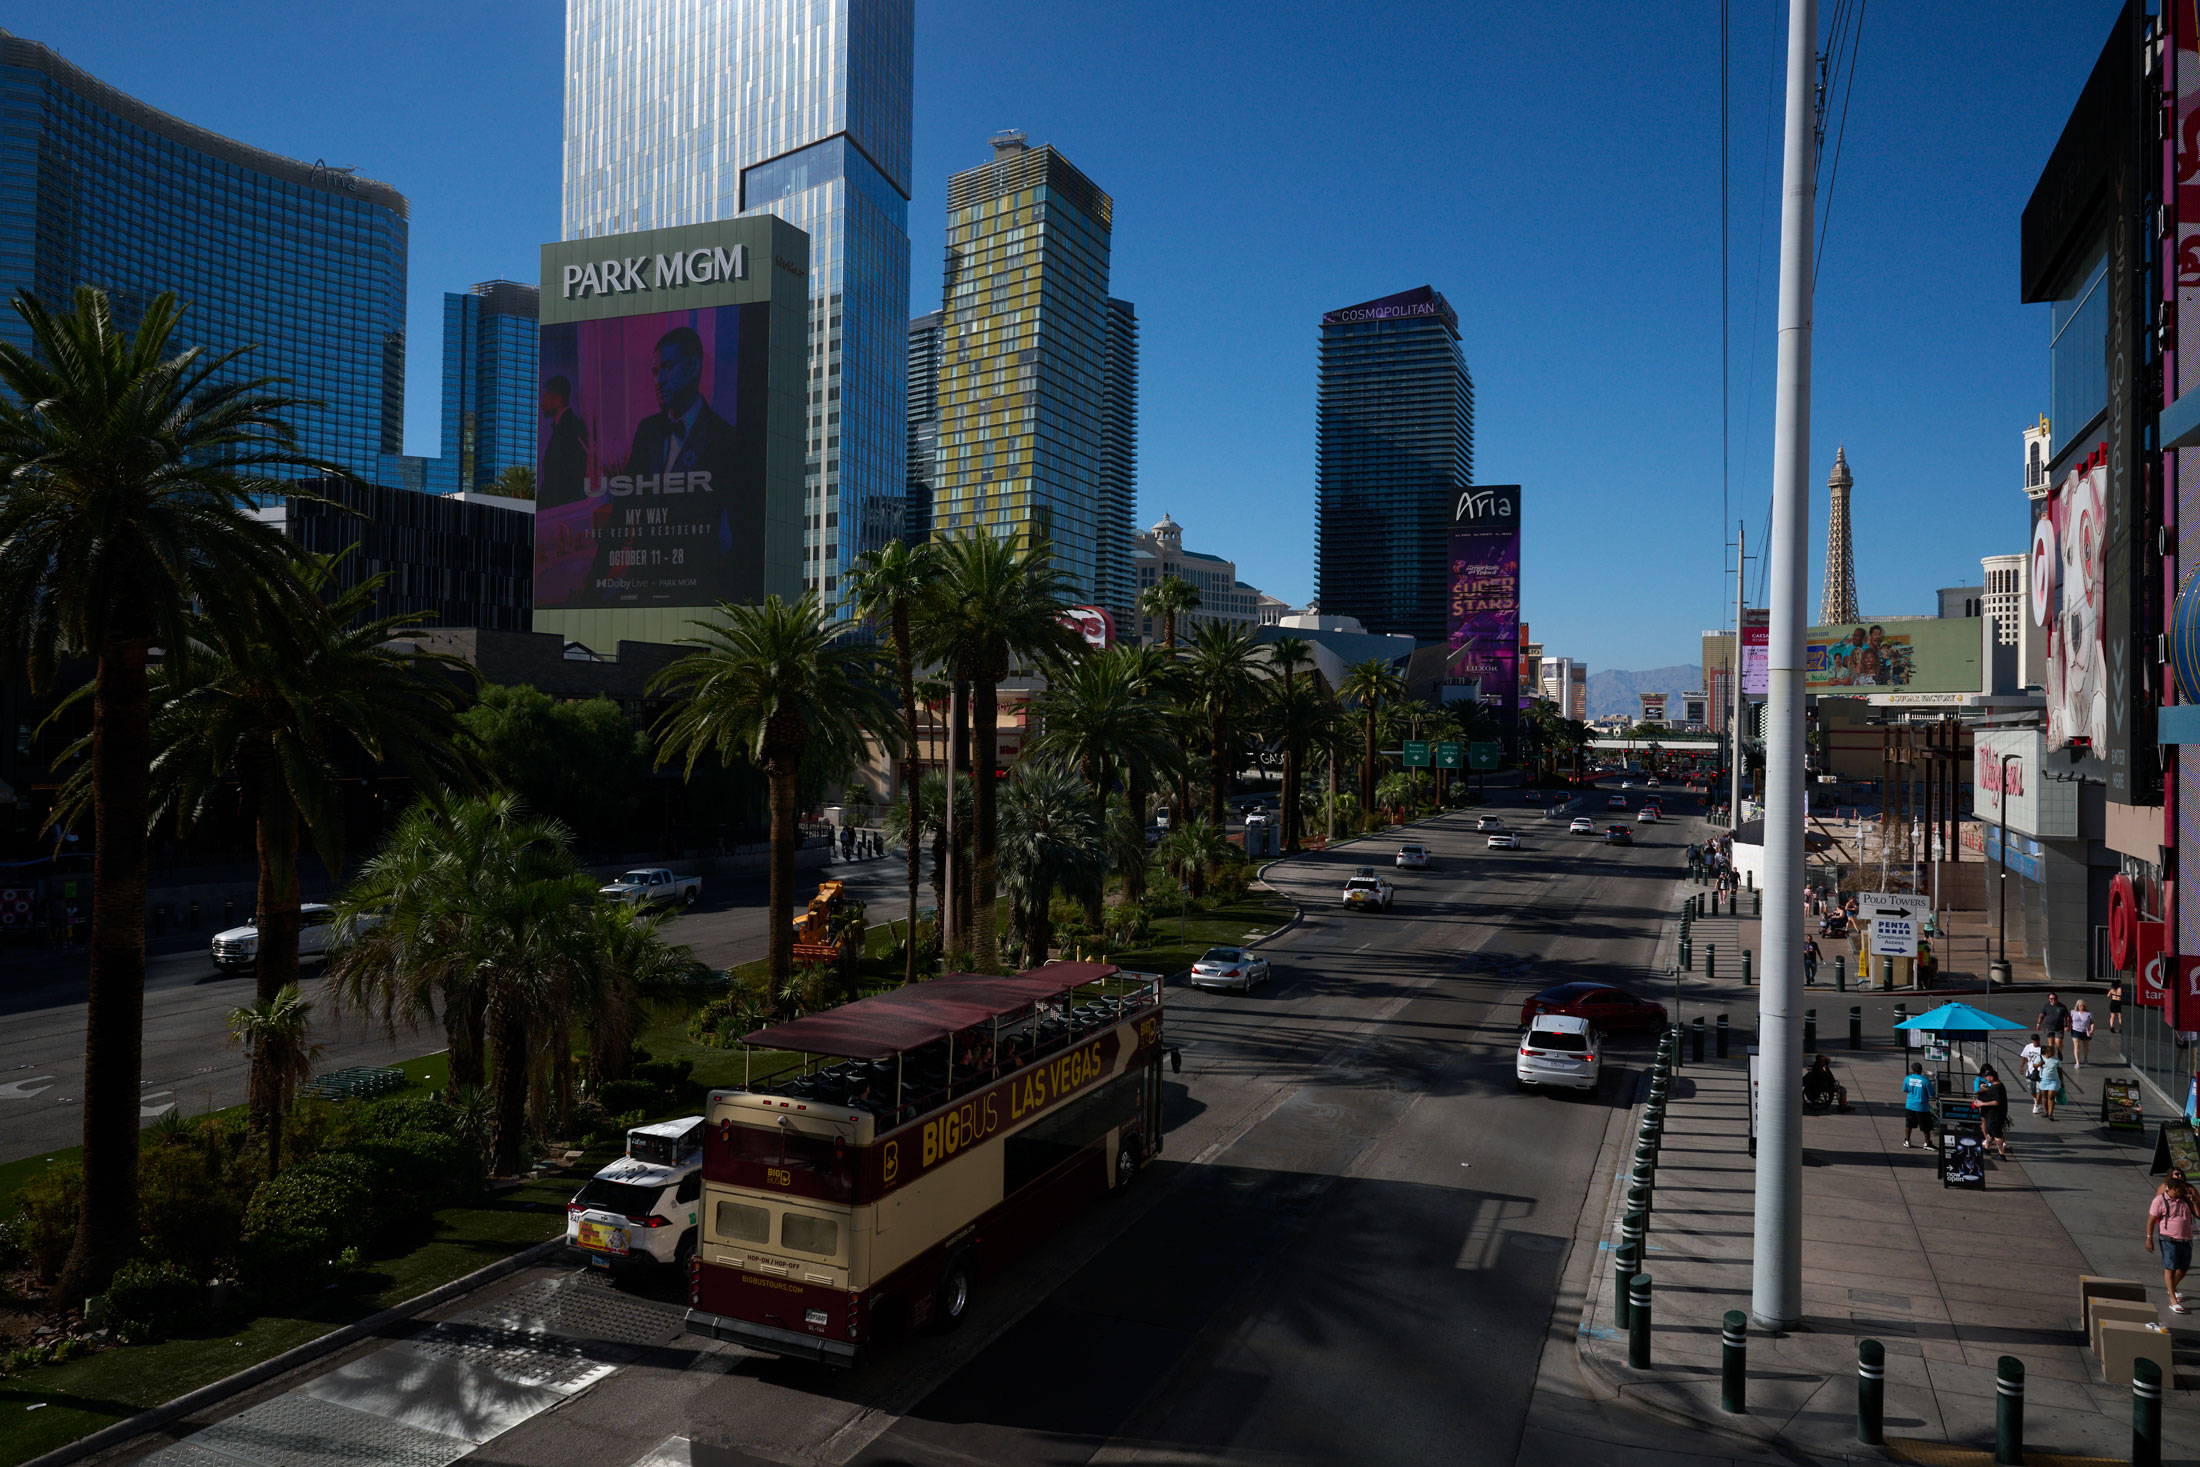 Las Vegas day clubs and pool parties return to pre-pandemic levels